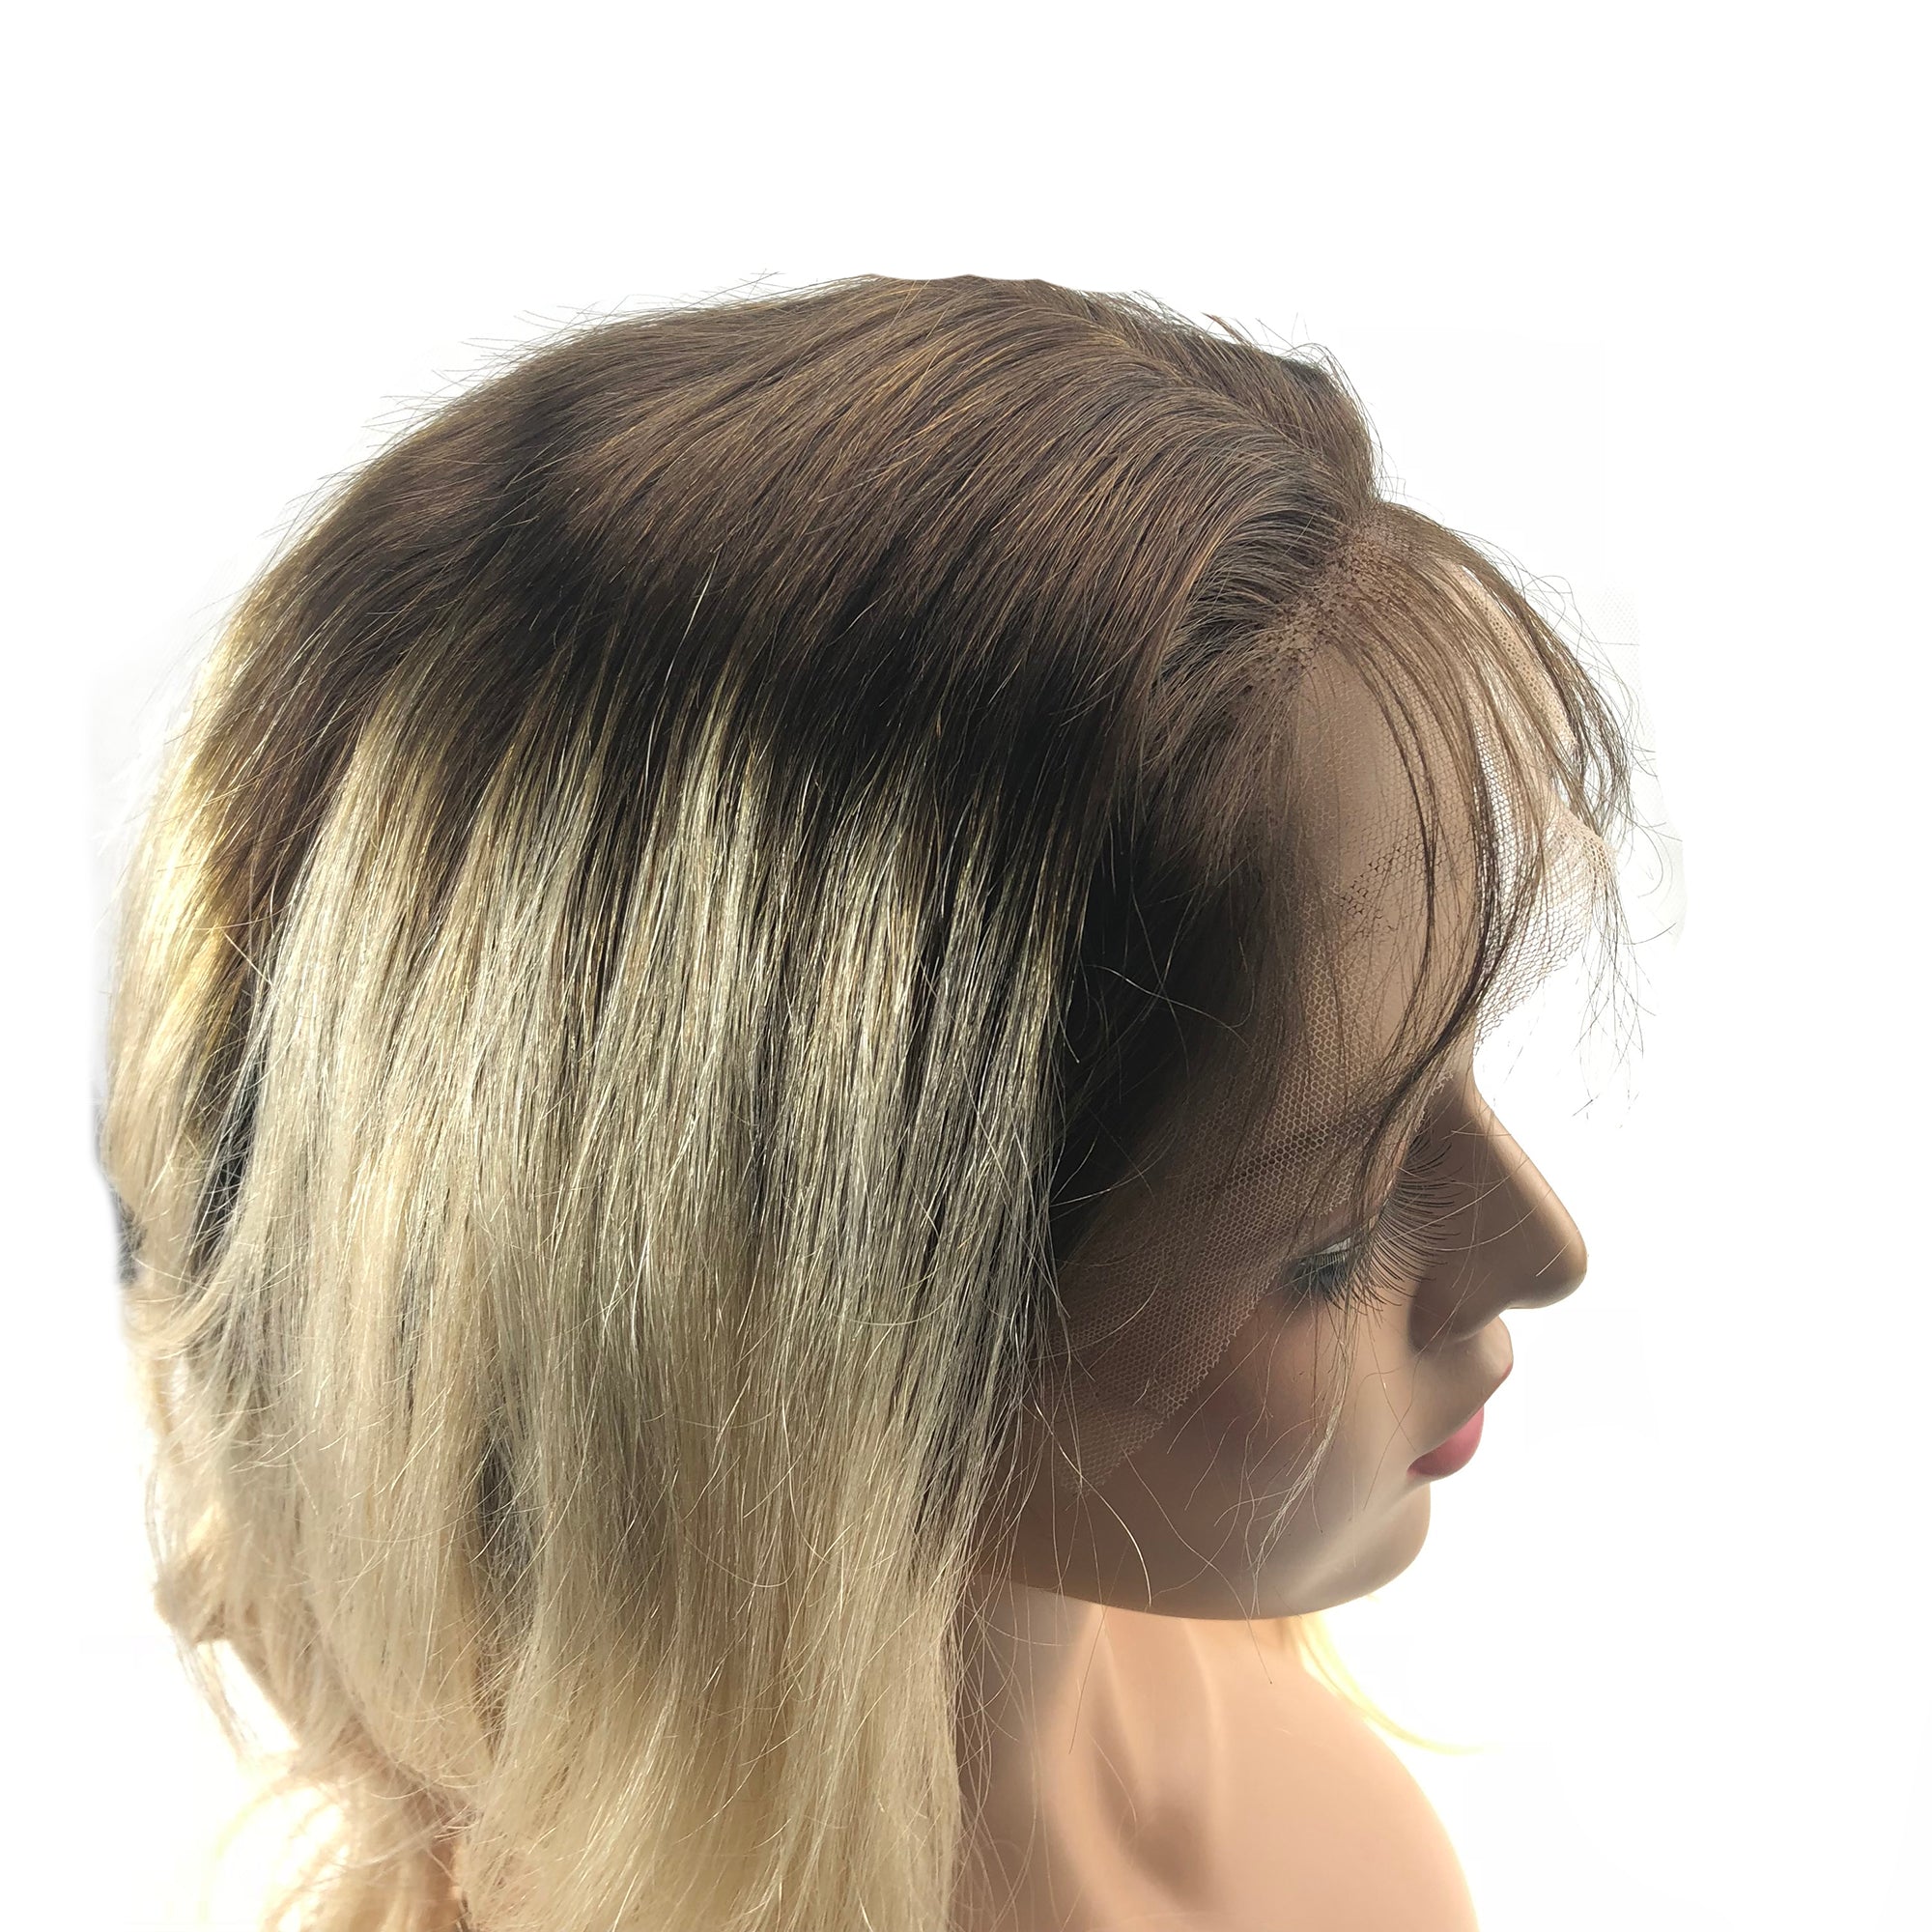 thick end blonde tone hair, front lace wig, remy human hair, thick hair wig, healthy human hair wig, human hair wig, wiglet, short wig, long wig, 